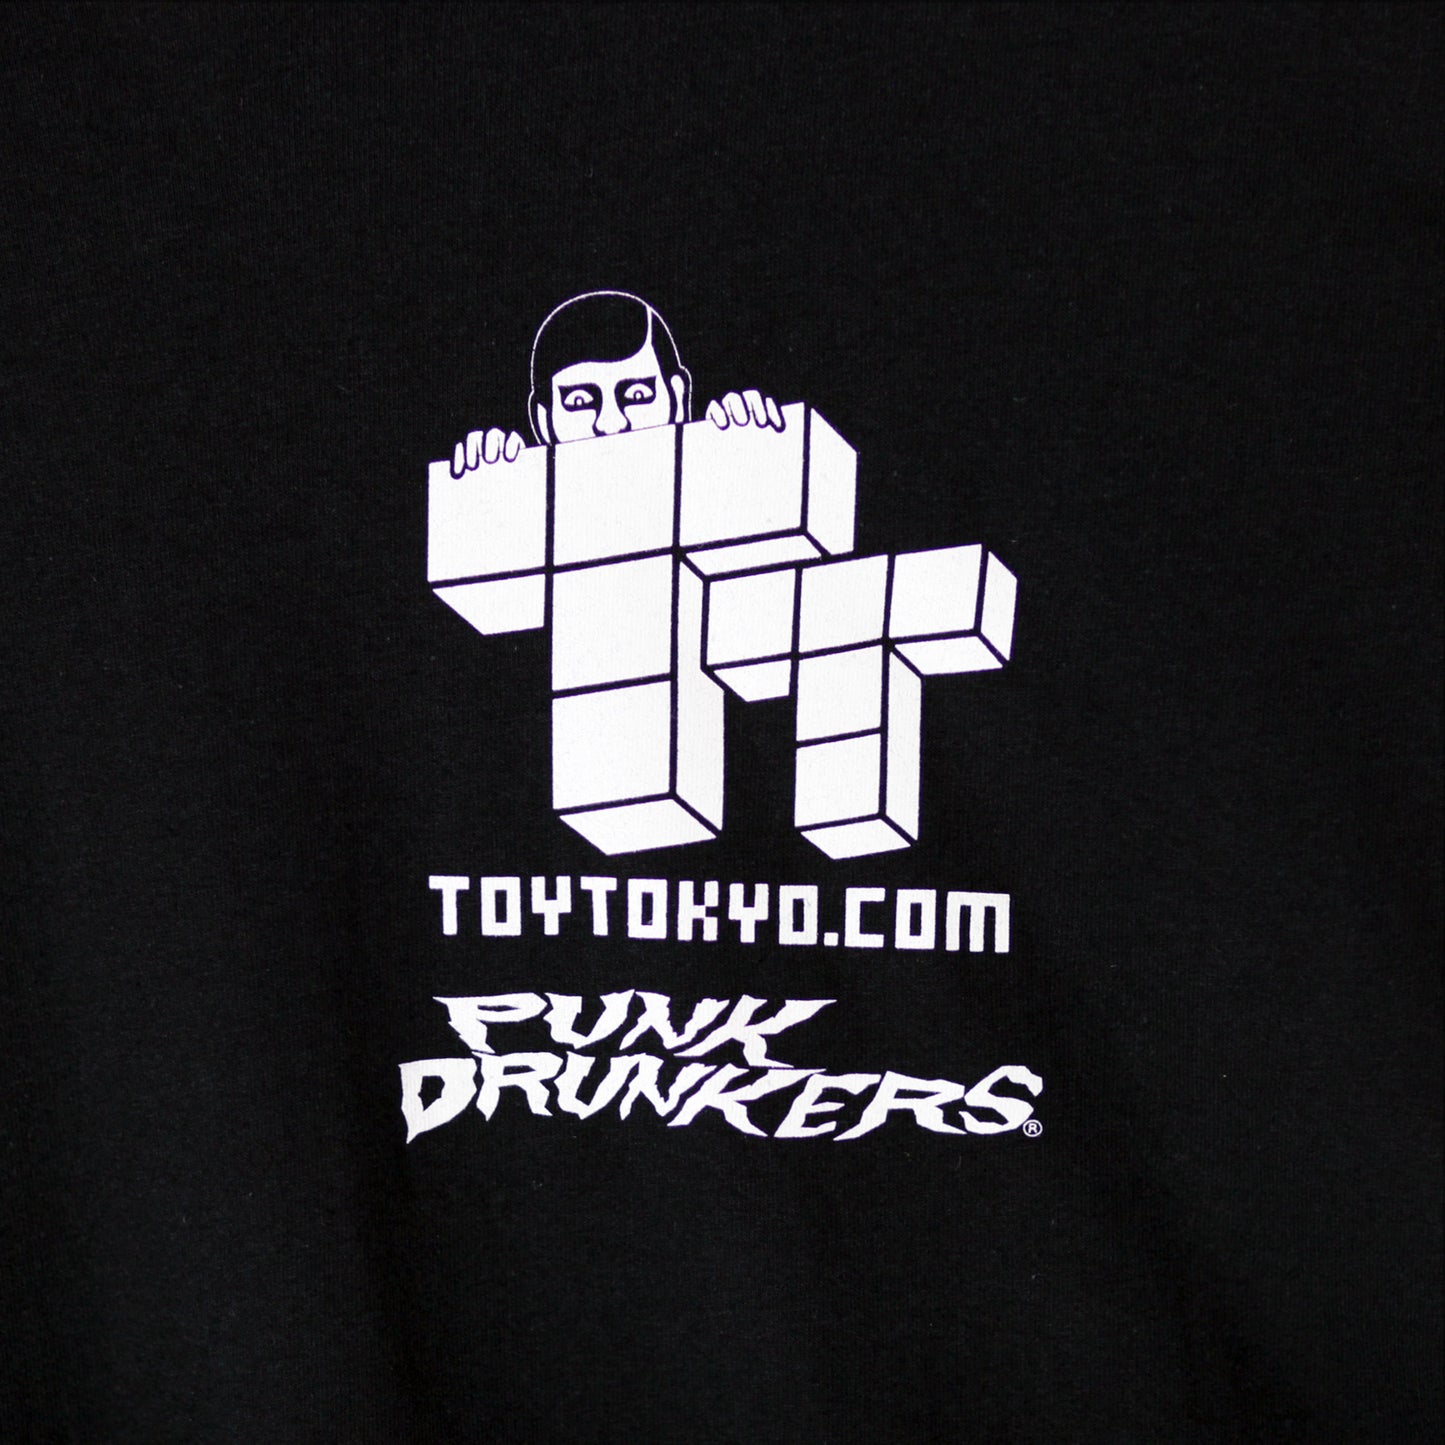 Punk Drunkers x Toy Tokyo - Aitsu in NYC Black T-Shirt